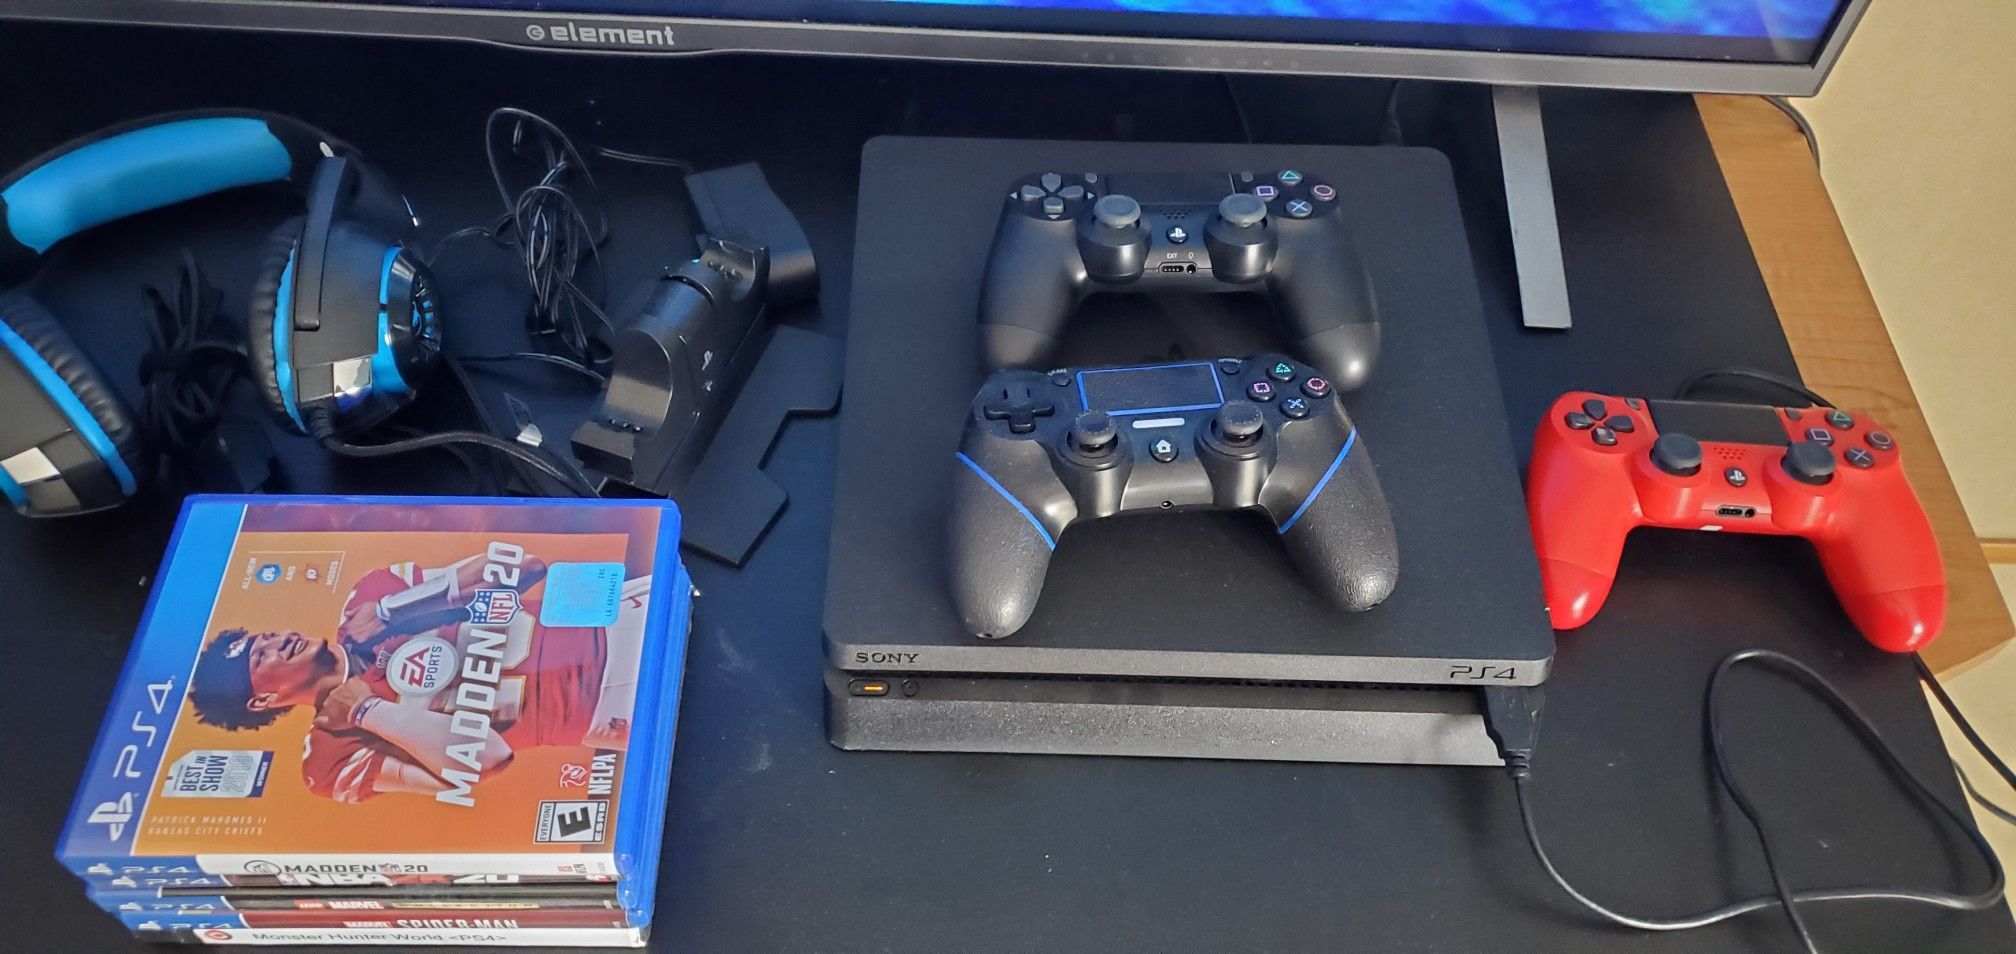 Playstation 4 Slim 1TB with extras.